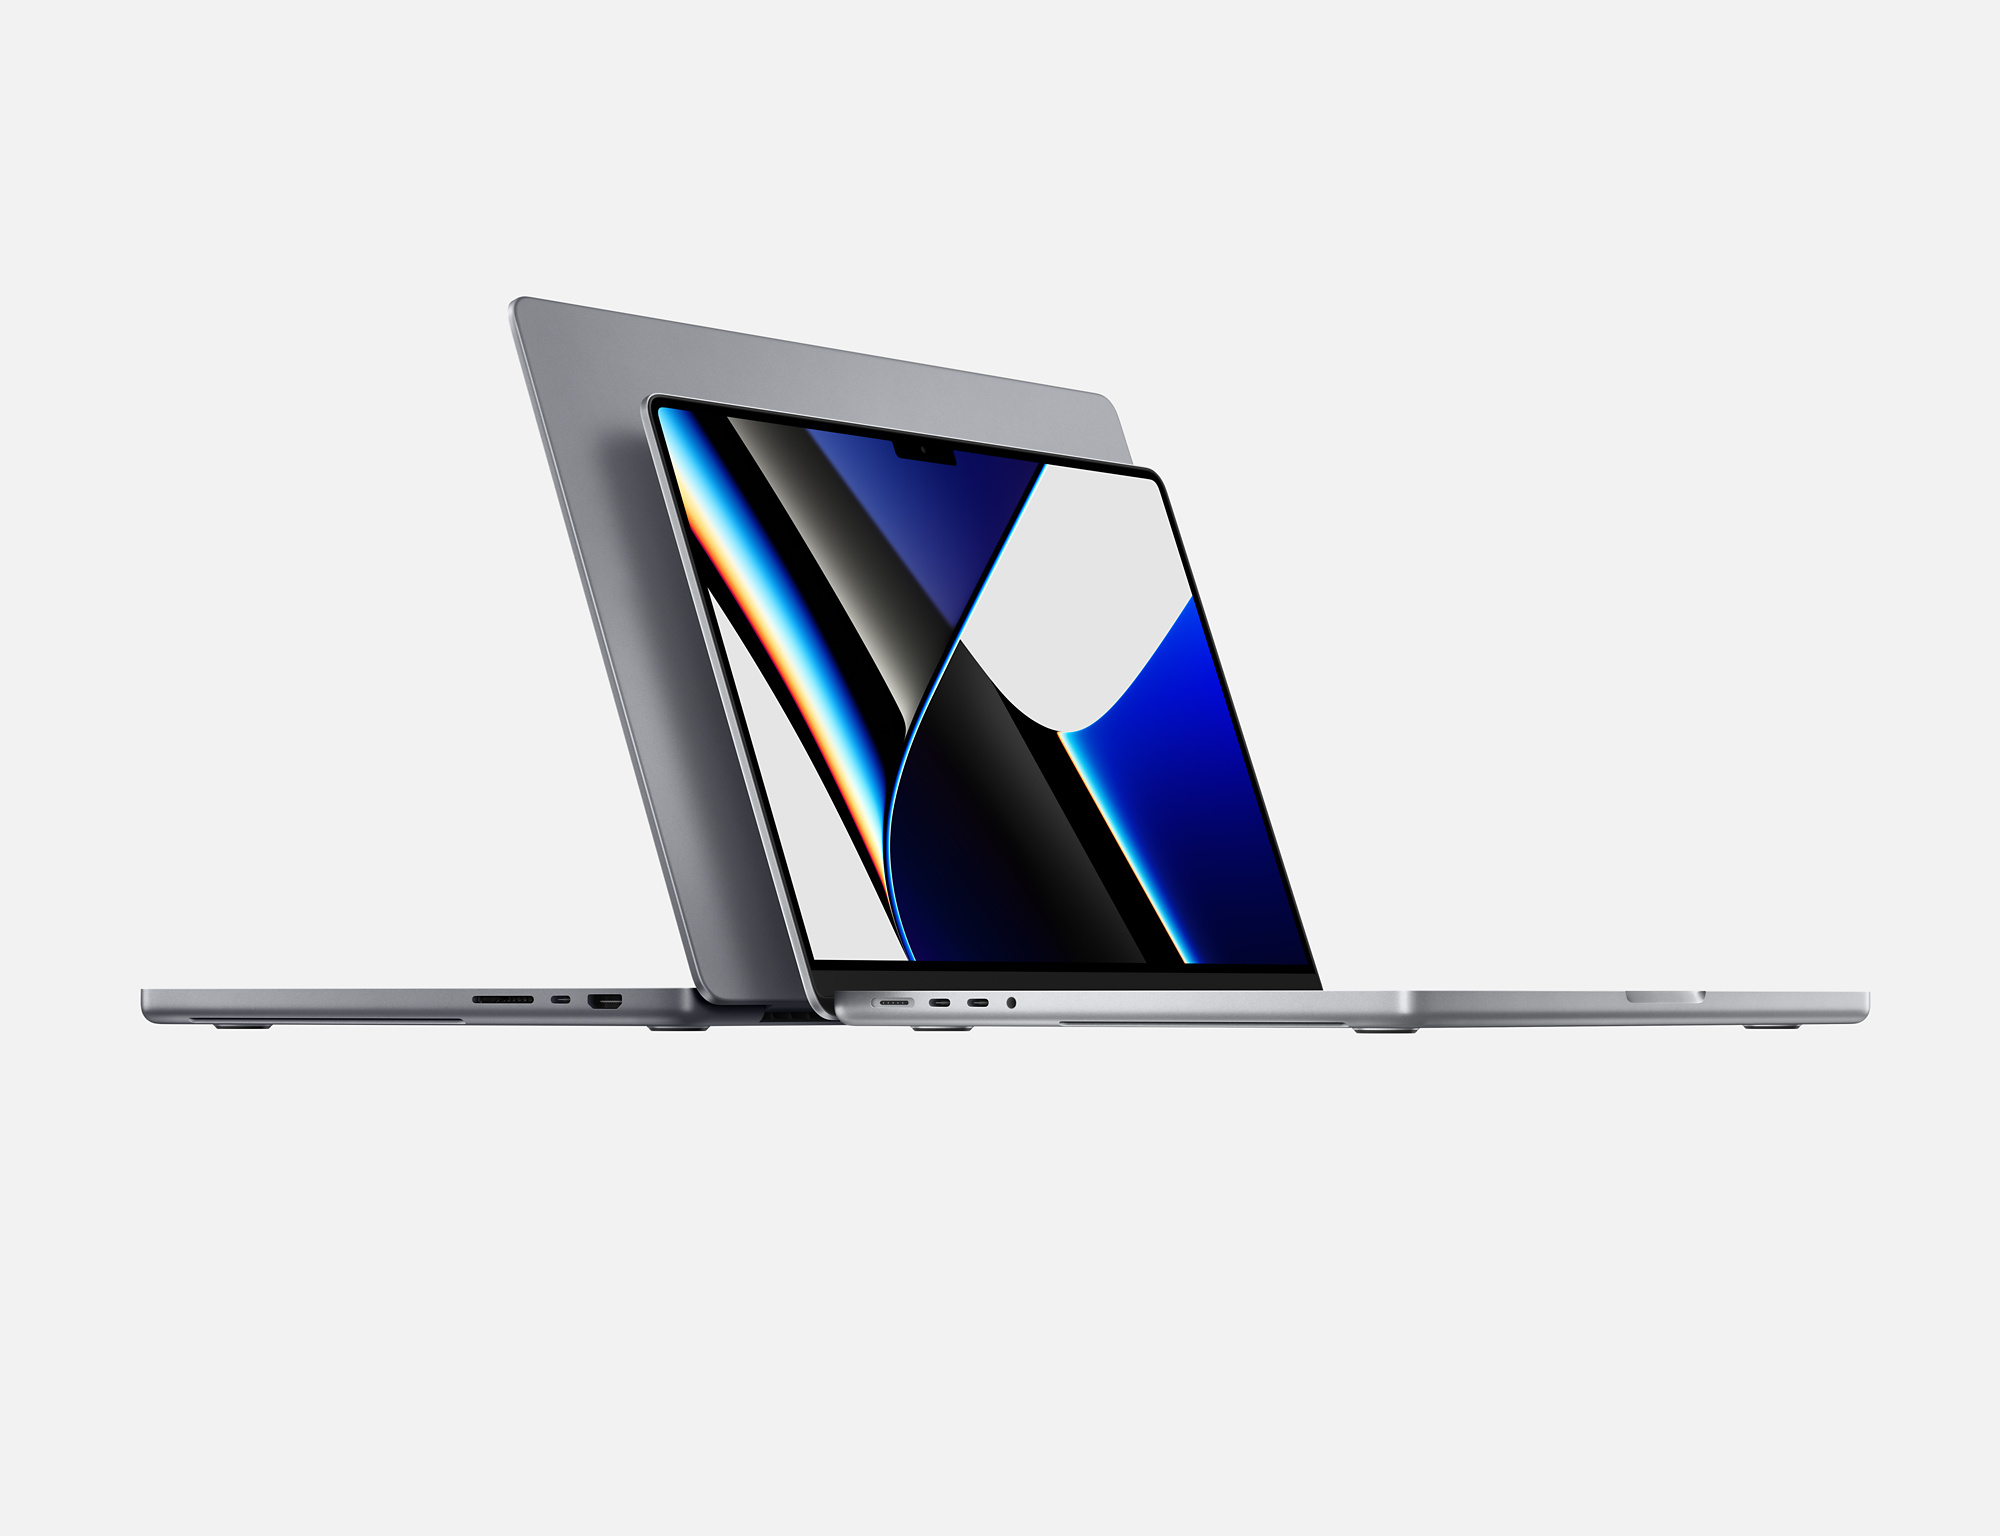 Apple MacBook Pro (14-inch, Apple M1 Pro chip with 8-core CPU and 14-core  GPU, 16GB RAM, 512GB SSD) Space Gray